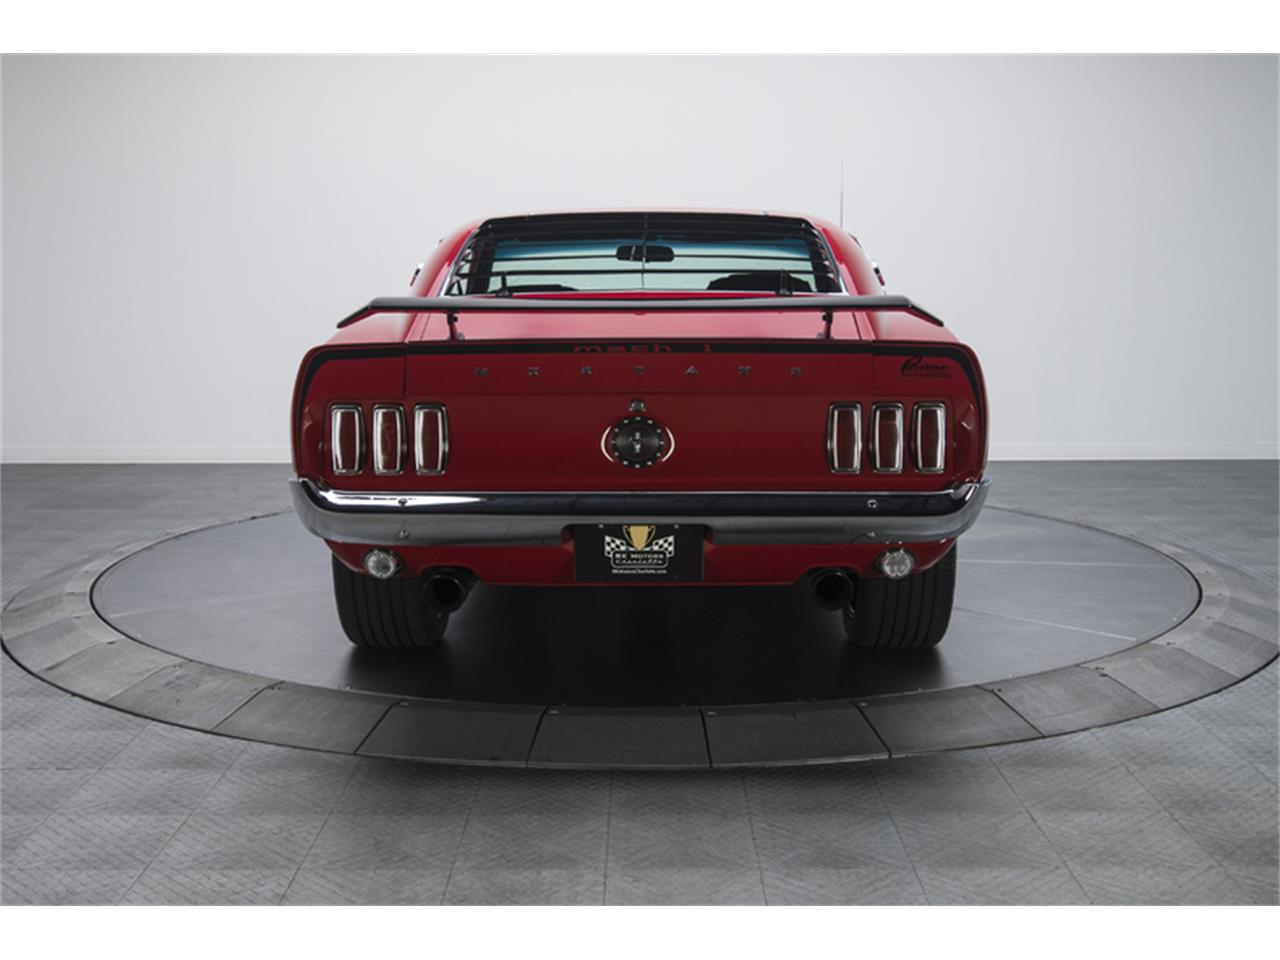 1969 Ford Mustang Mach 1 for Sale | ClassicCars.com | CC-928707